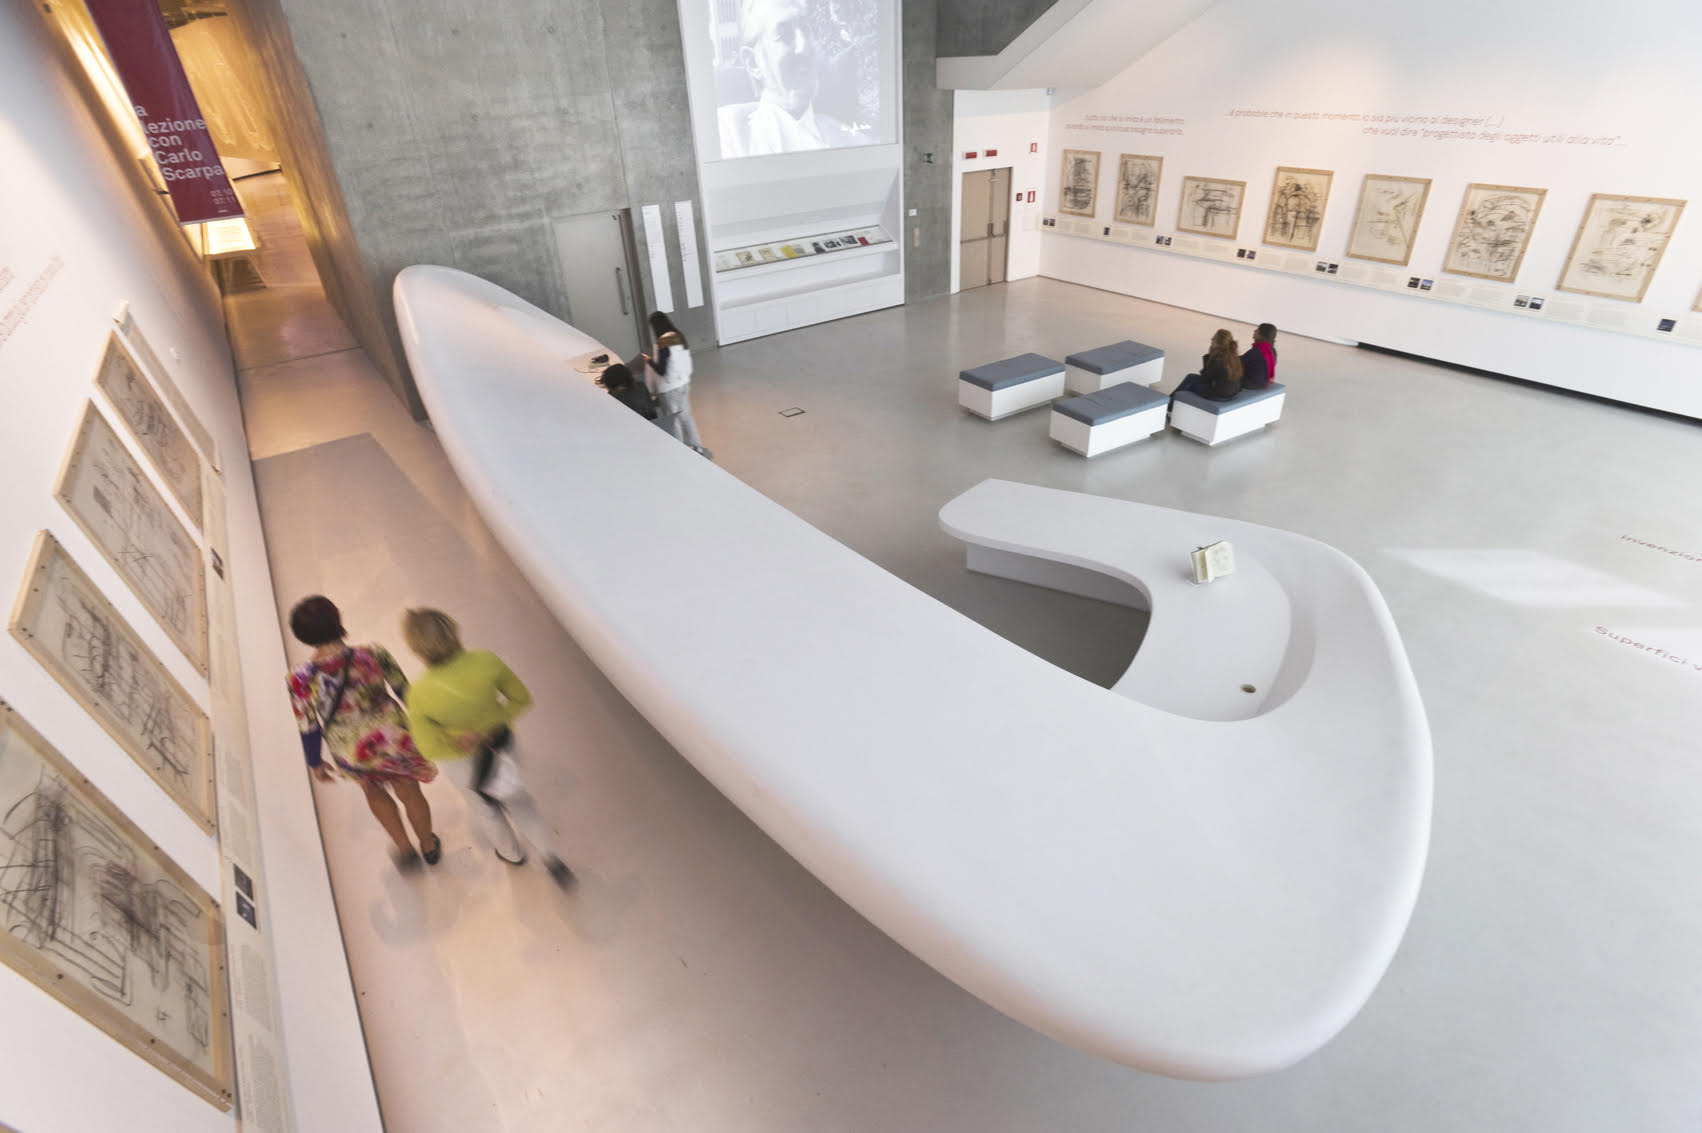 Double-curved furnishings with organic shapes MAXXI Museum of Rome